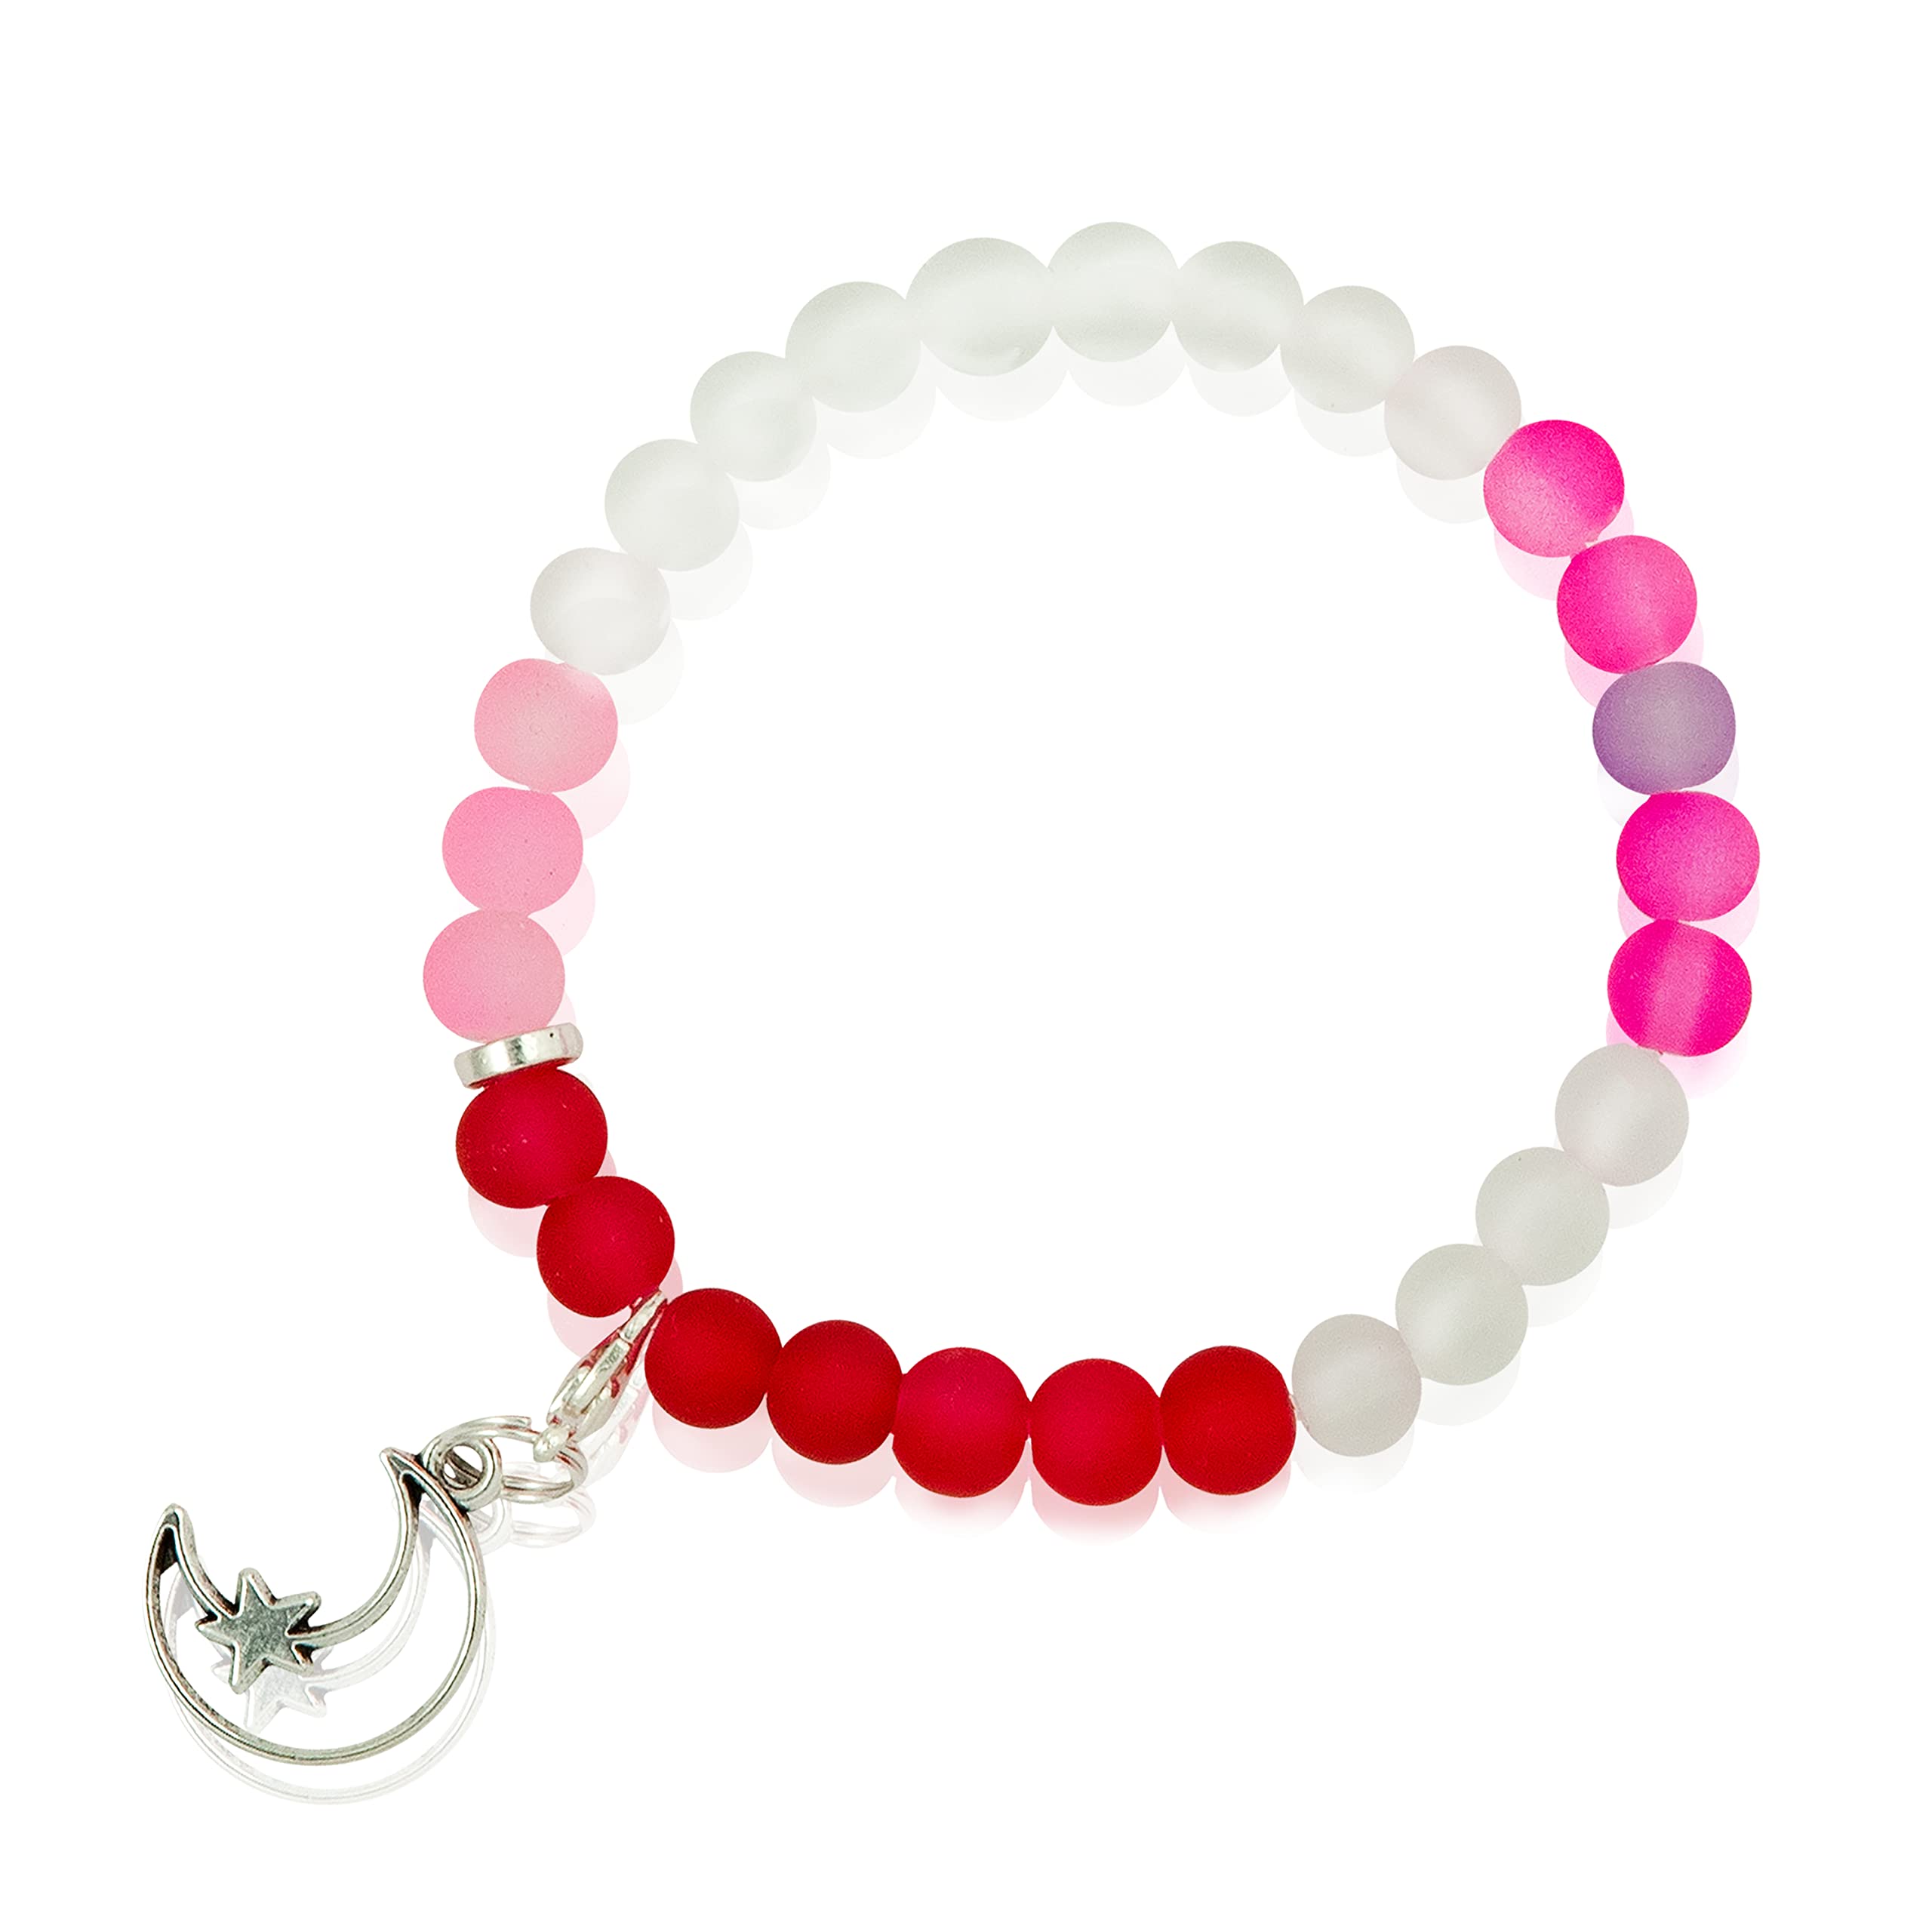 Period Tracking Bracelet, First Period Gift for Tweens